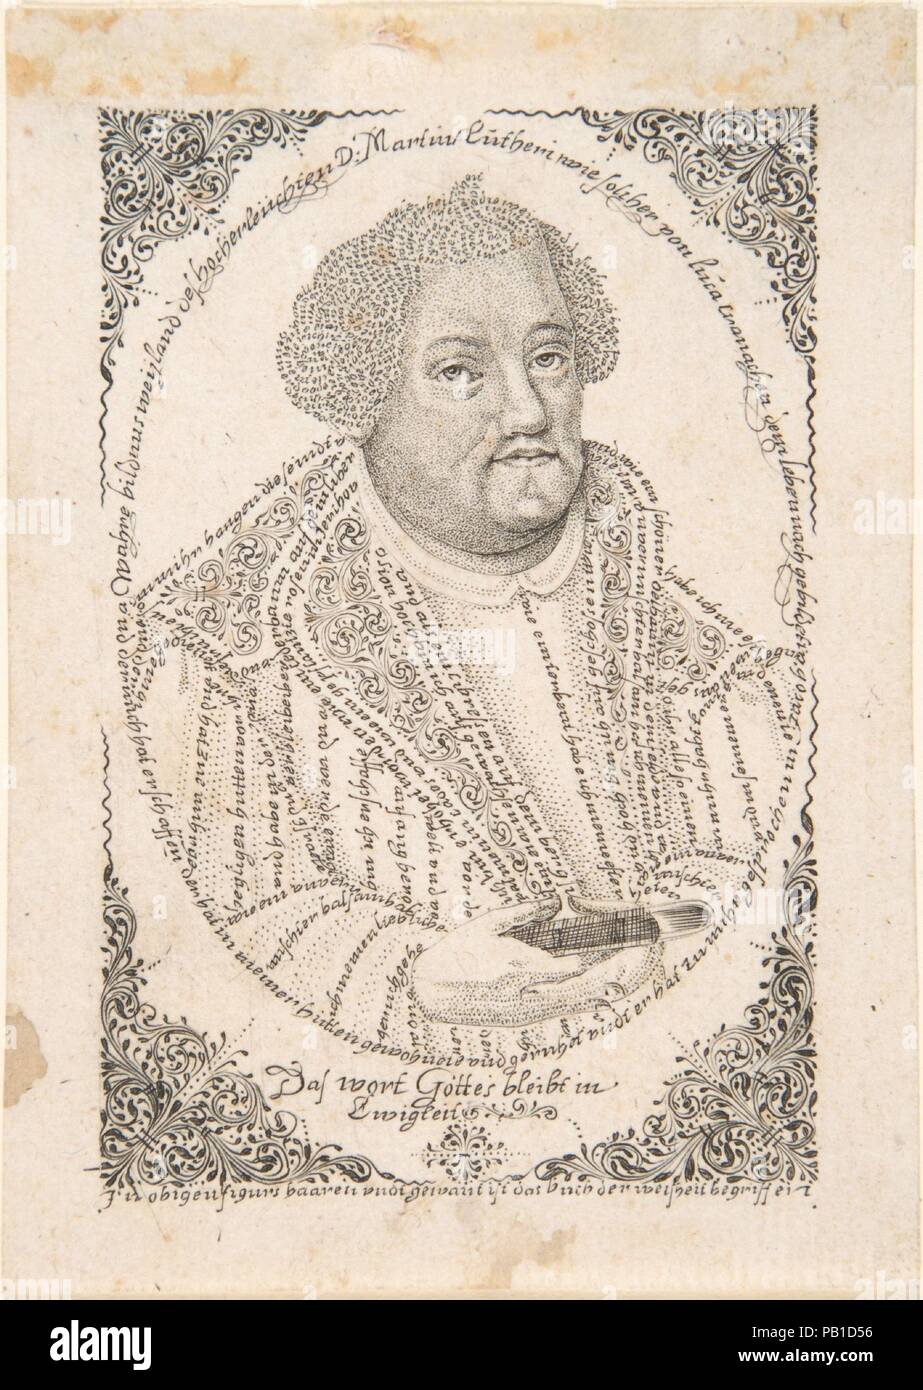 Portrait of Martin Luther. Artist: Johann Michael Püchler (German, born Schwäbisch-Gmünd, active ca. 1680-1702). Dimensions: Sheet: 3 3/4 × 2 5/8 in. (9.5 × 6.7 cm). Date: ca. 1680-1702.  Coming from a family of engravers and calligraphers, Püchler created numerous portraits of Martin Luther, John Calvin, and other religious figures using virtuosic micrography. Made after a likeness by the sixteenthcentury artist Lucas Cranach the Elder, this portrait contains text from the Bible and perhaps from Luther's own Ninety-Five Theses. Püchler's style of micrography, forming the hair out of swirling  Stock Photo